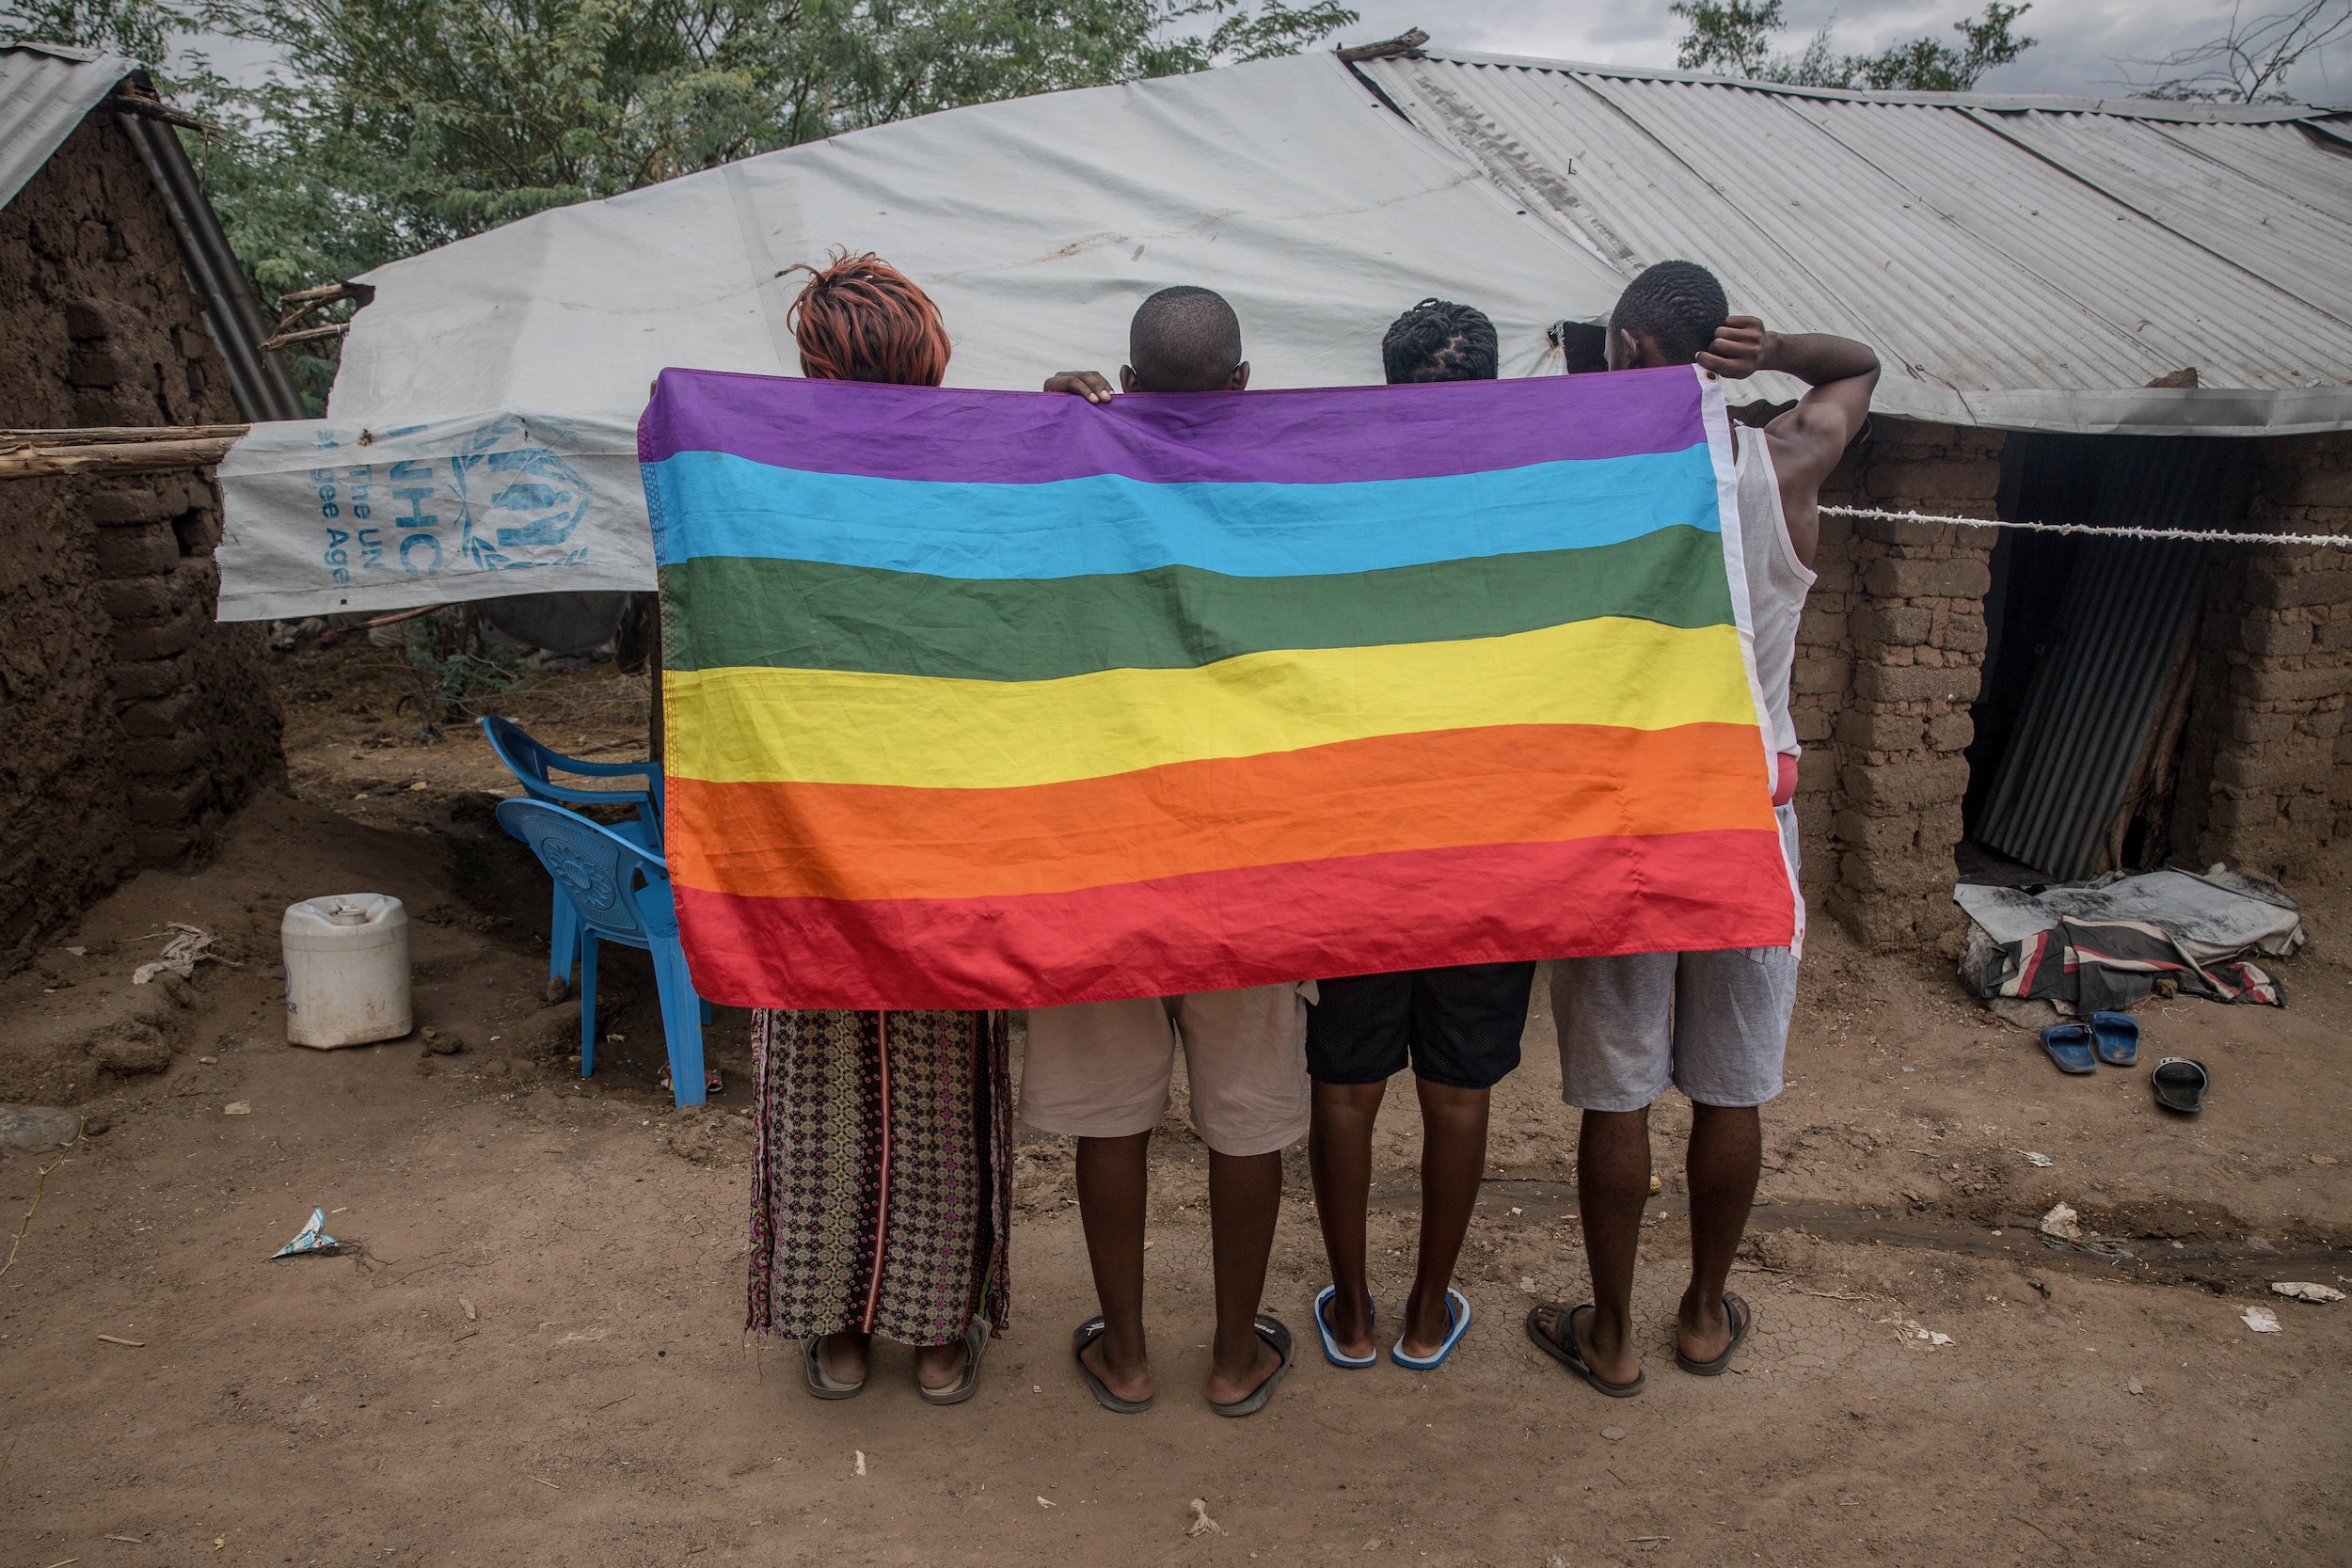 'Am I Going to Make It Until Tomorrow?': A Gay Refugee’s Escape from Persecution